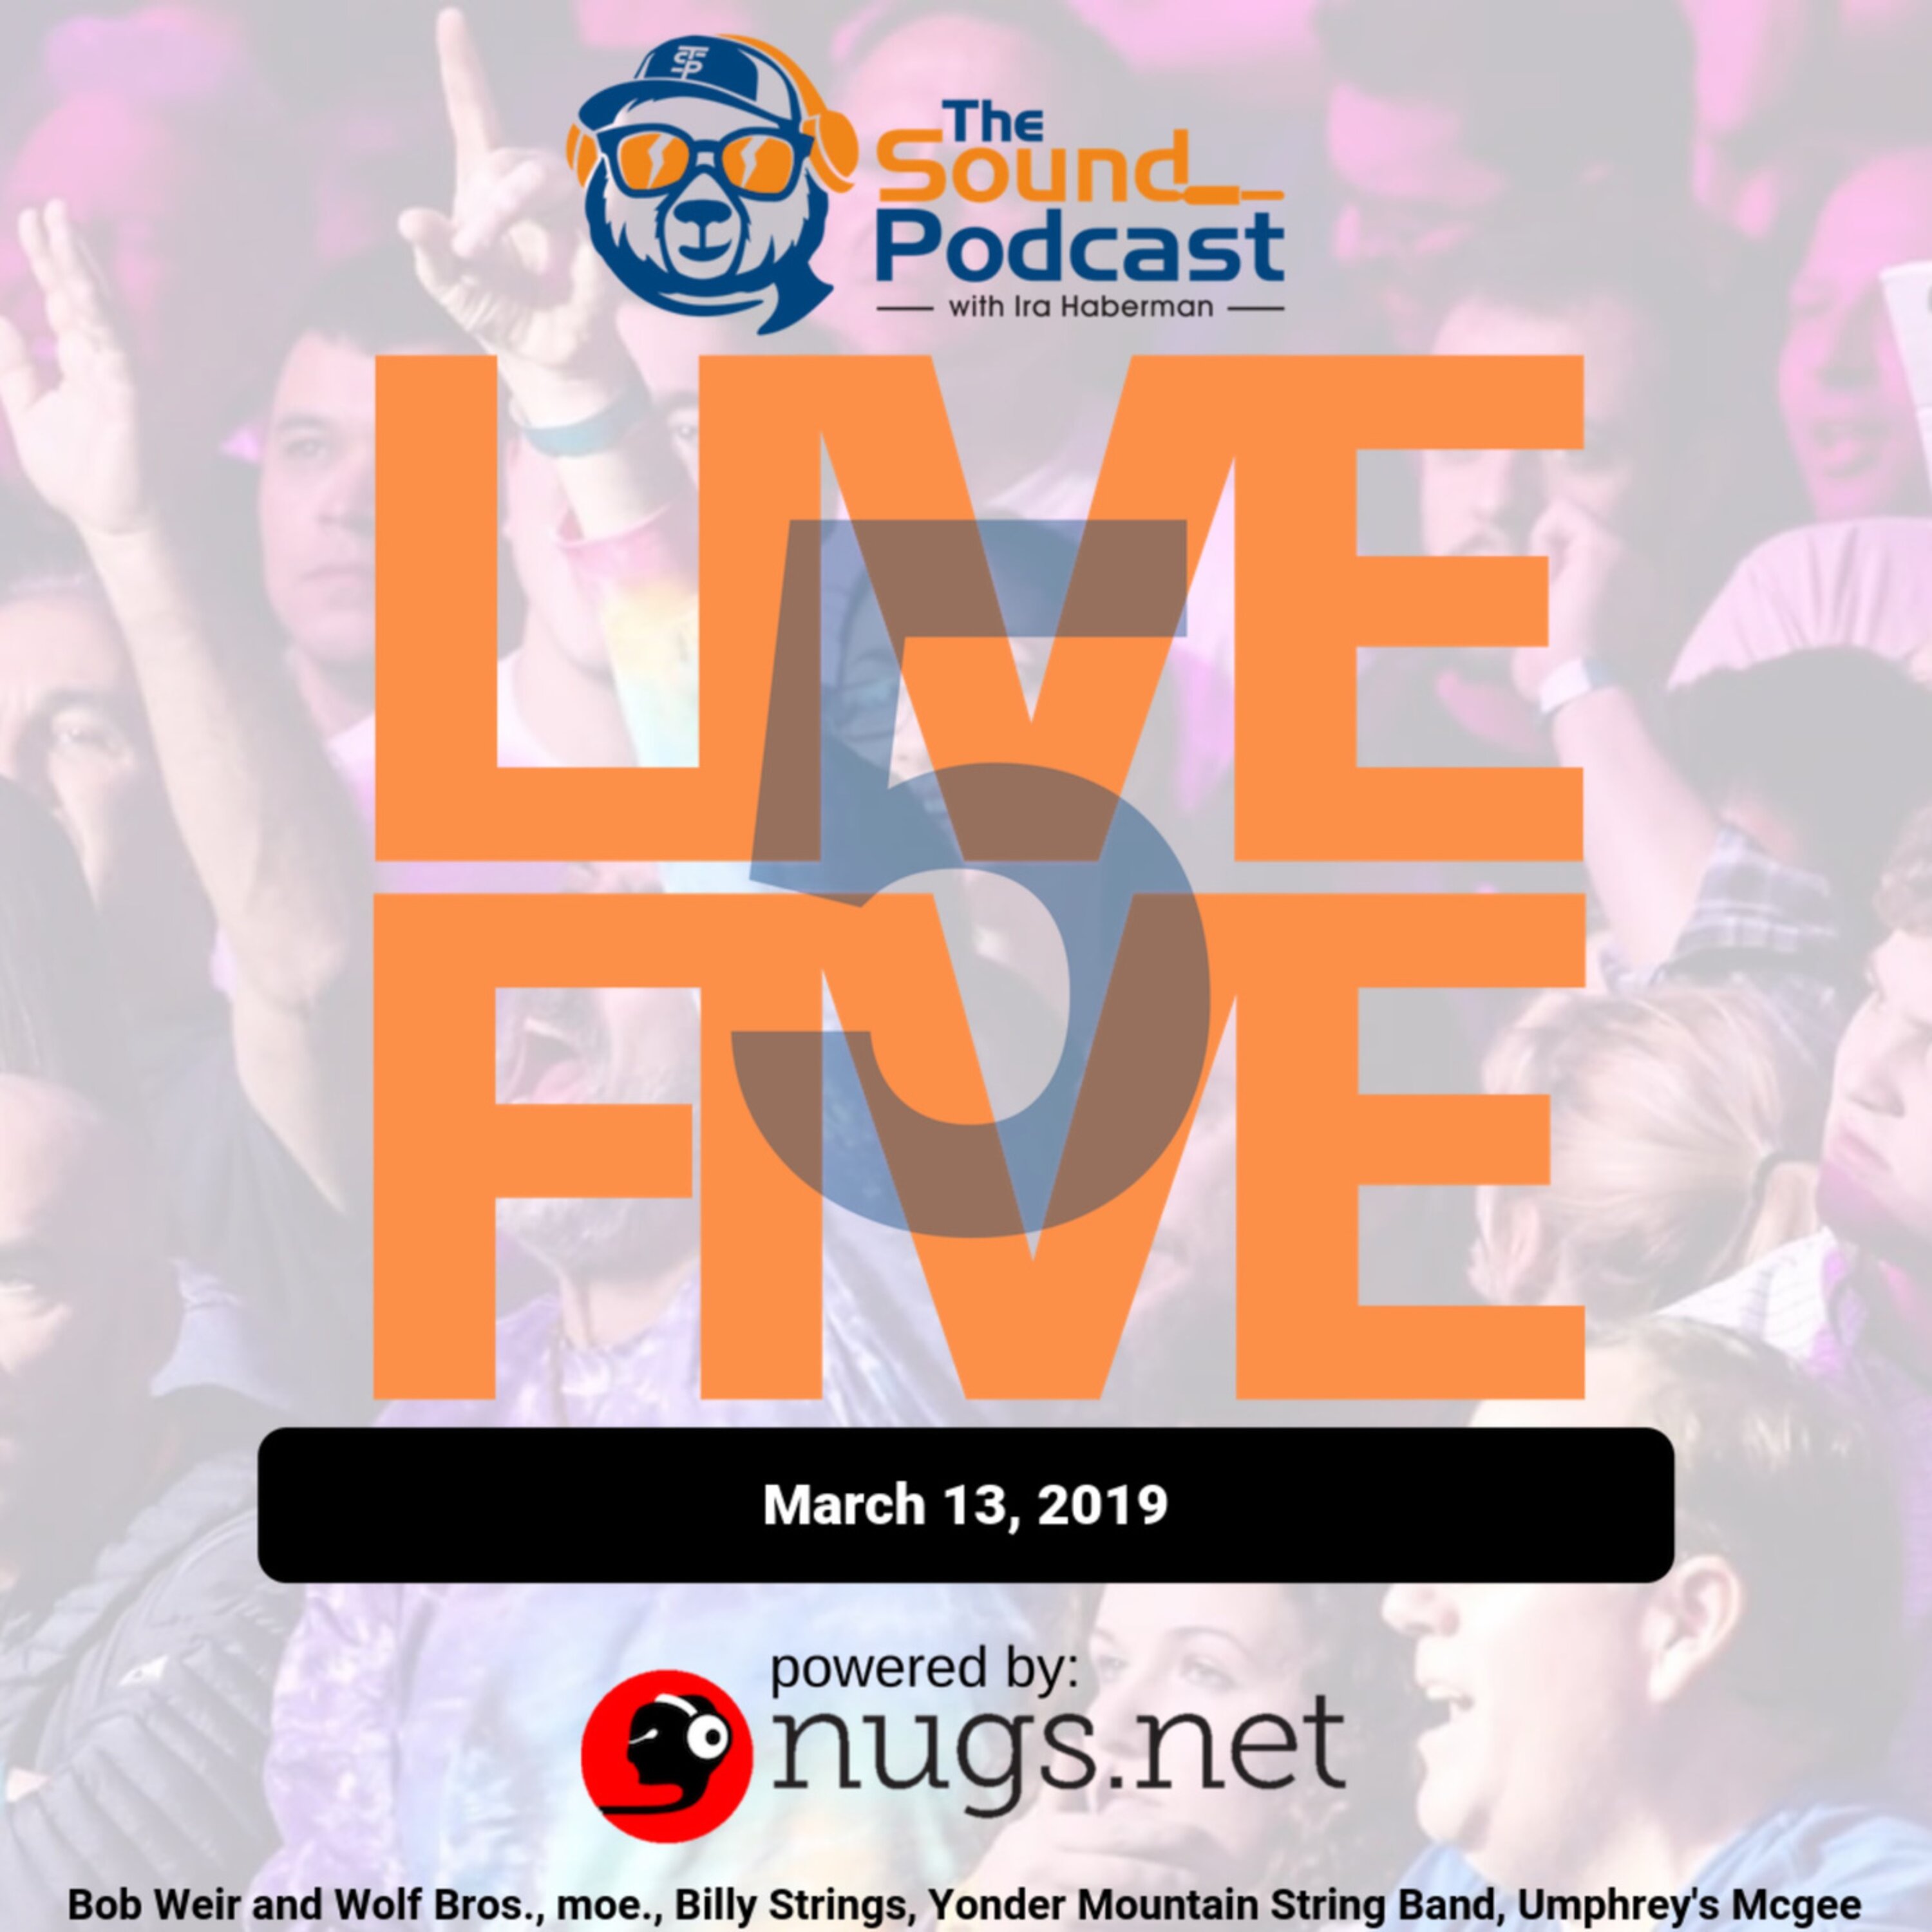 Episode: 11 - Live 5 - March 13, 2019.